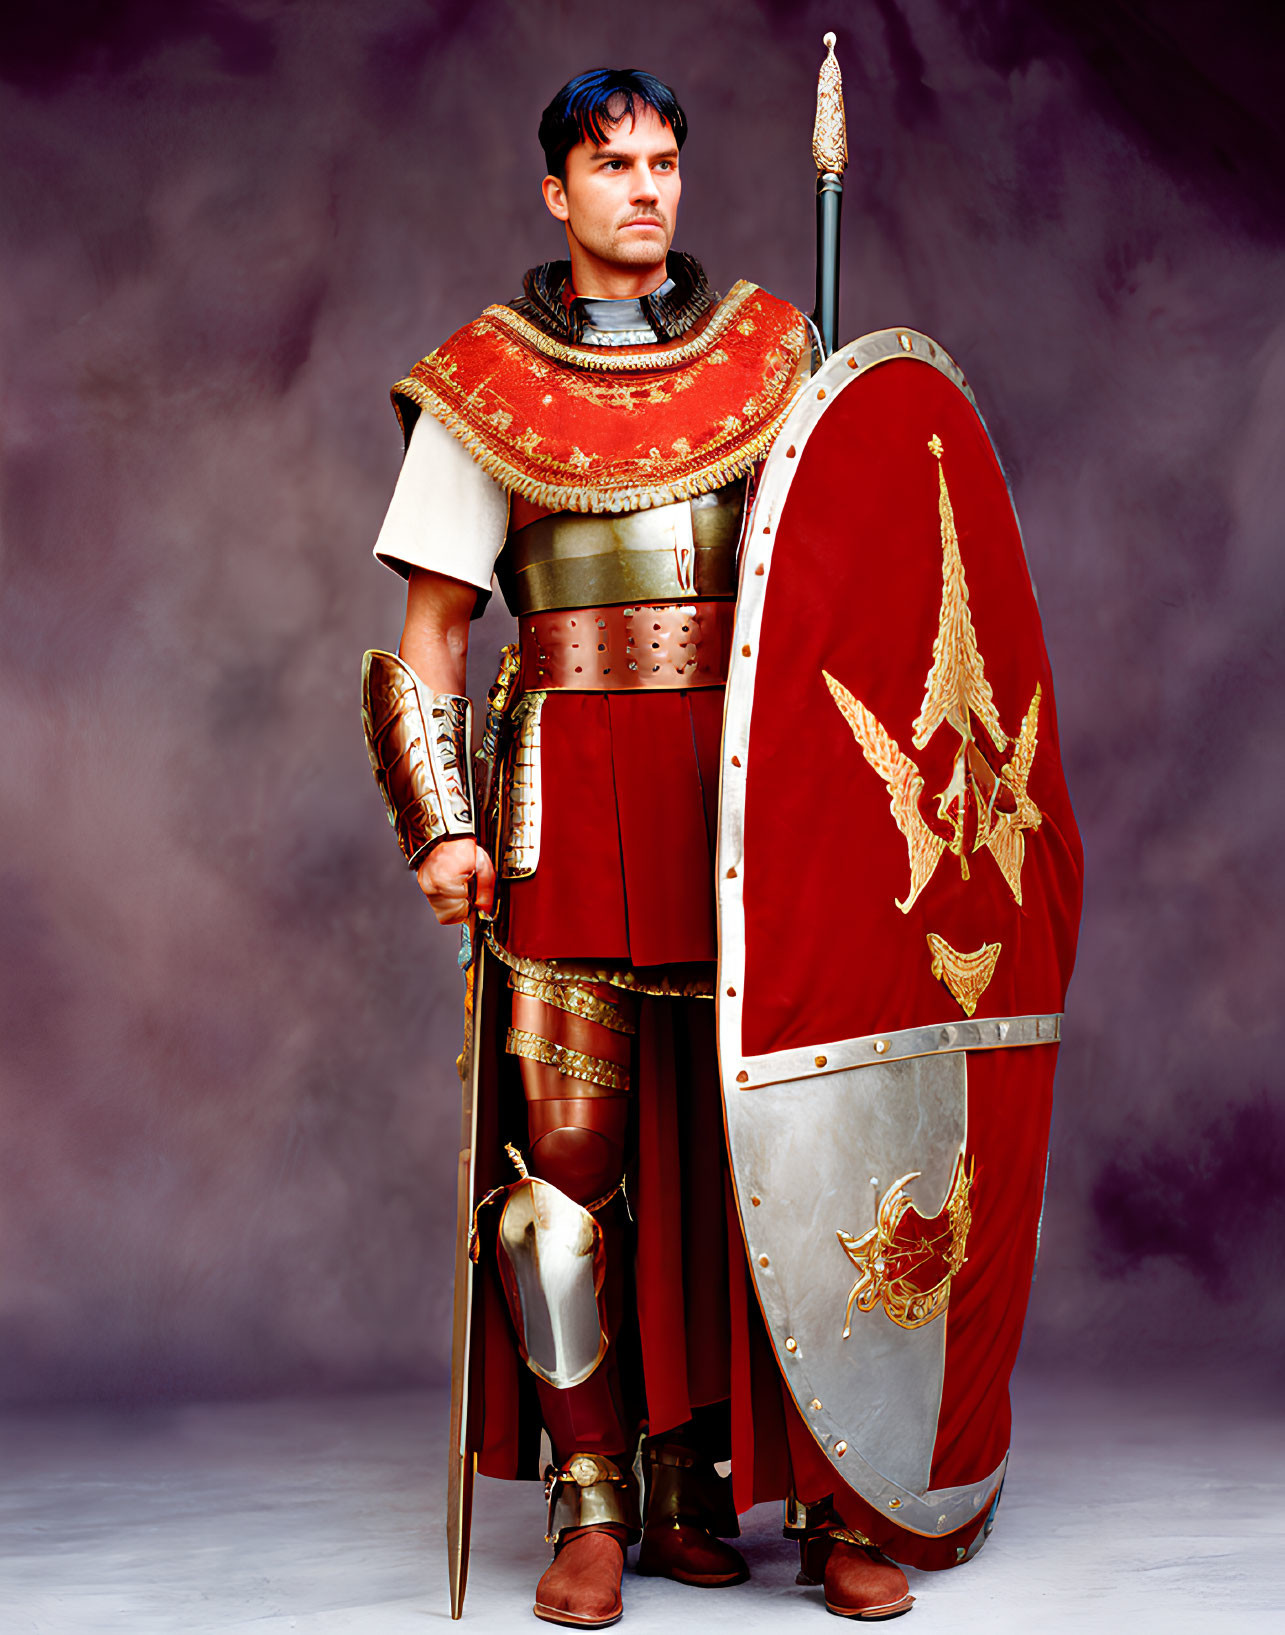 Elaborate Roman soldier costume with shield and spear on gray backdrop